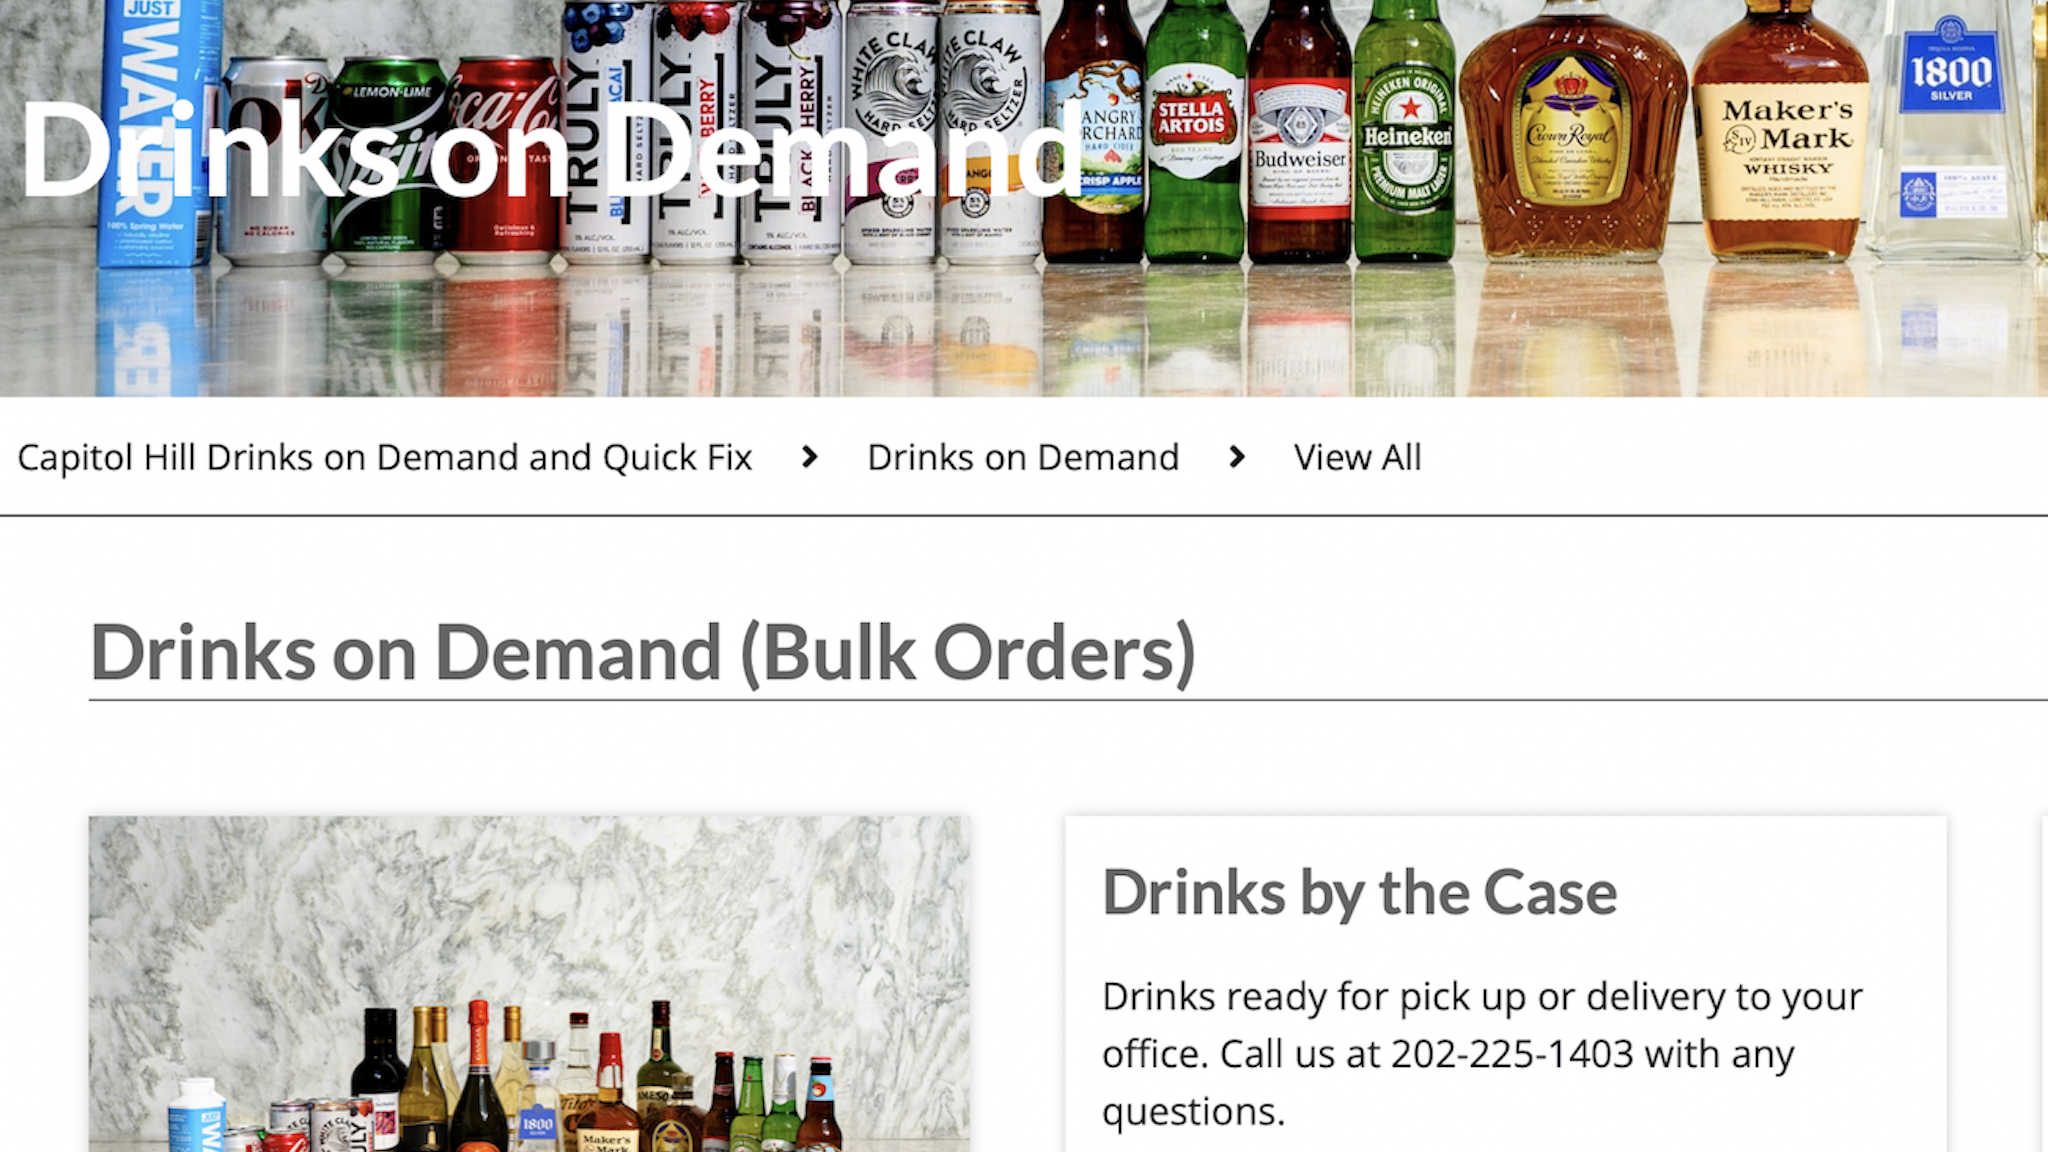 House members can now have booze delivered straight to their offices, thanks to the new Capitol Hill caterer.